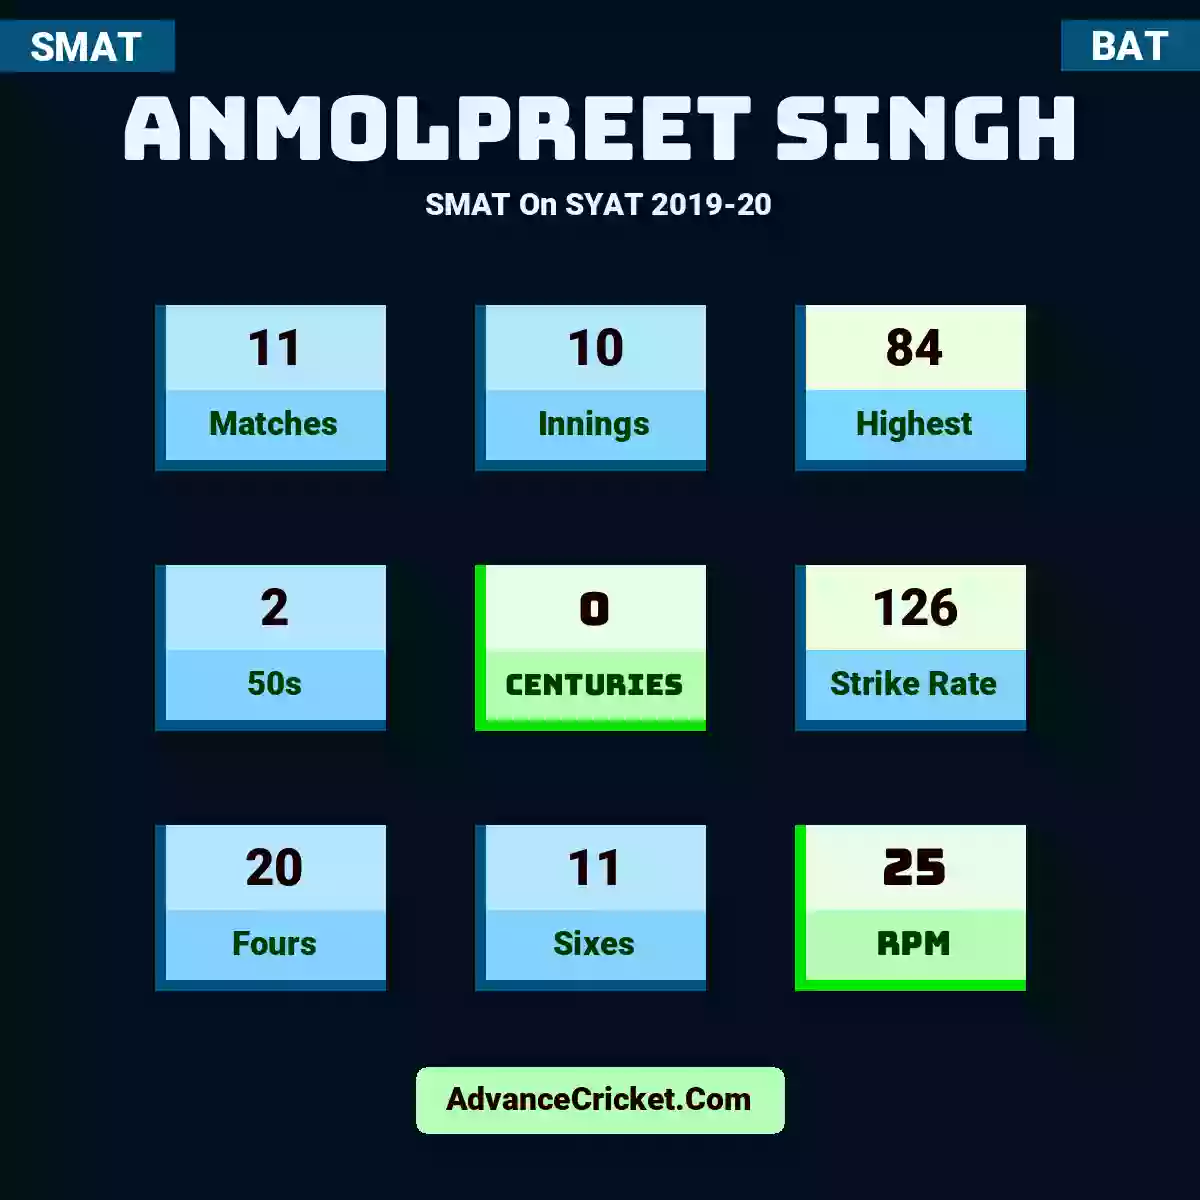 Anmolpreet Singh SMAT  On SYAT 2019-20, Anmolpreet Singh played 11 matches, scored 84 runs as highest, 2 half-centuries, and 0 centuries, with a strike rate of 126. A.Singh hit 20 fours and 11 sixes, with an RPM of 25.